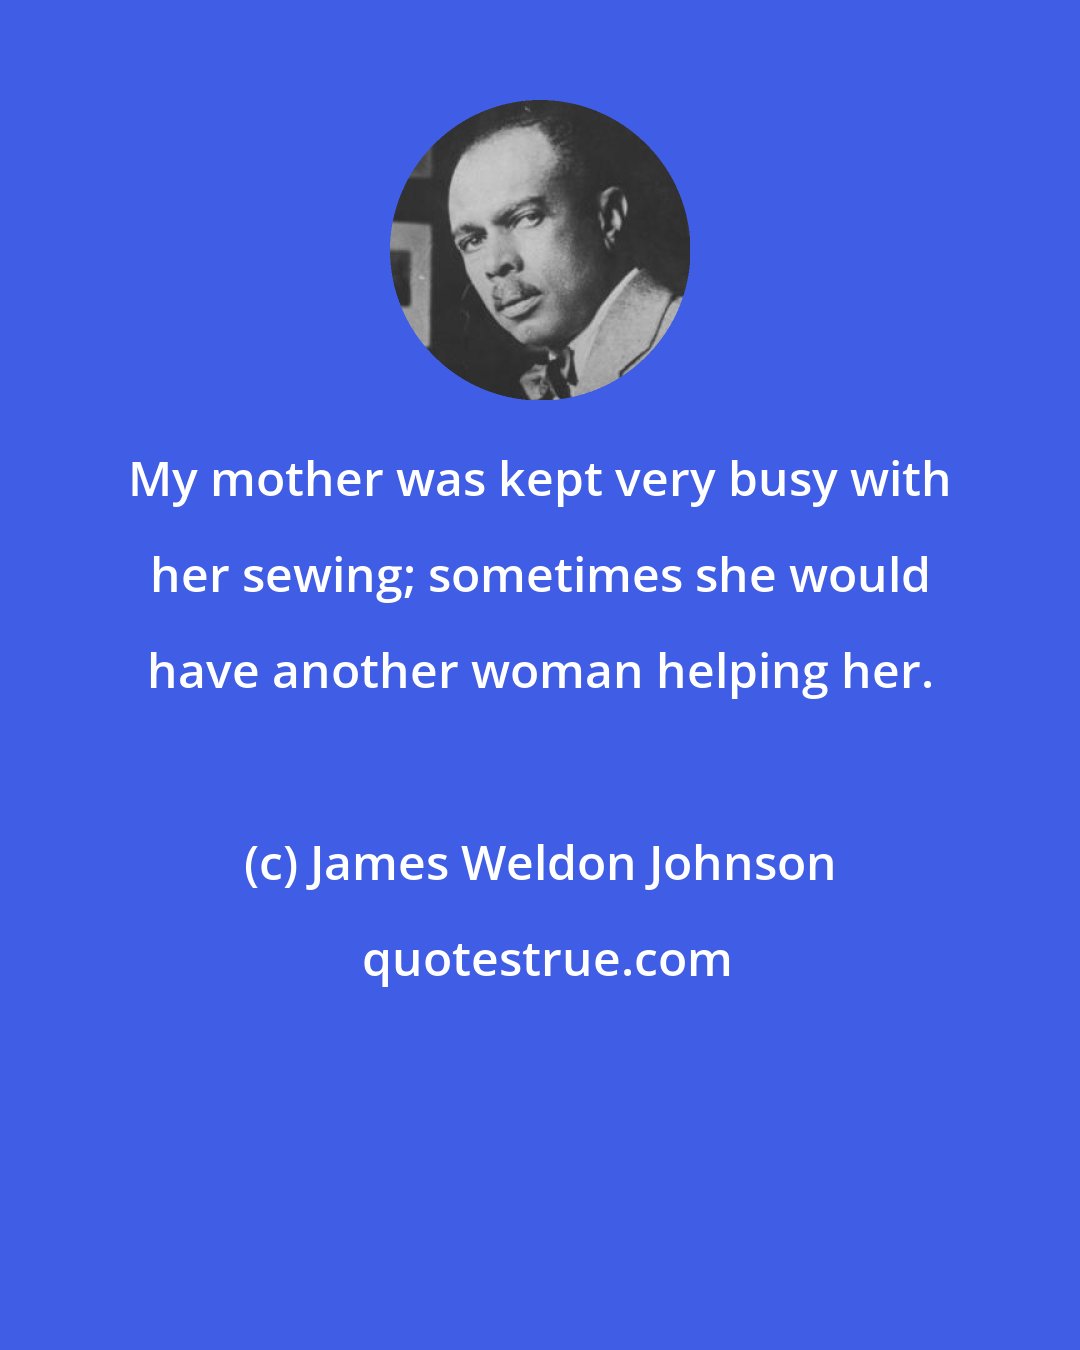 James Weldon Johnson: My mother was kept very busy with her sewing; sometimes she would have another woman helping her.